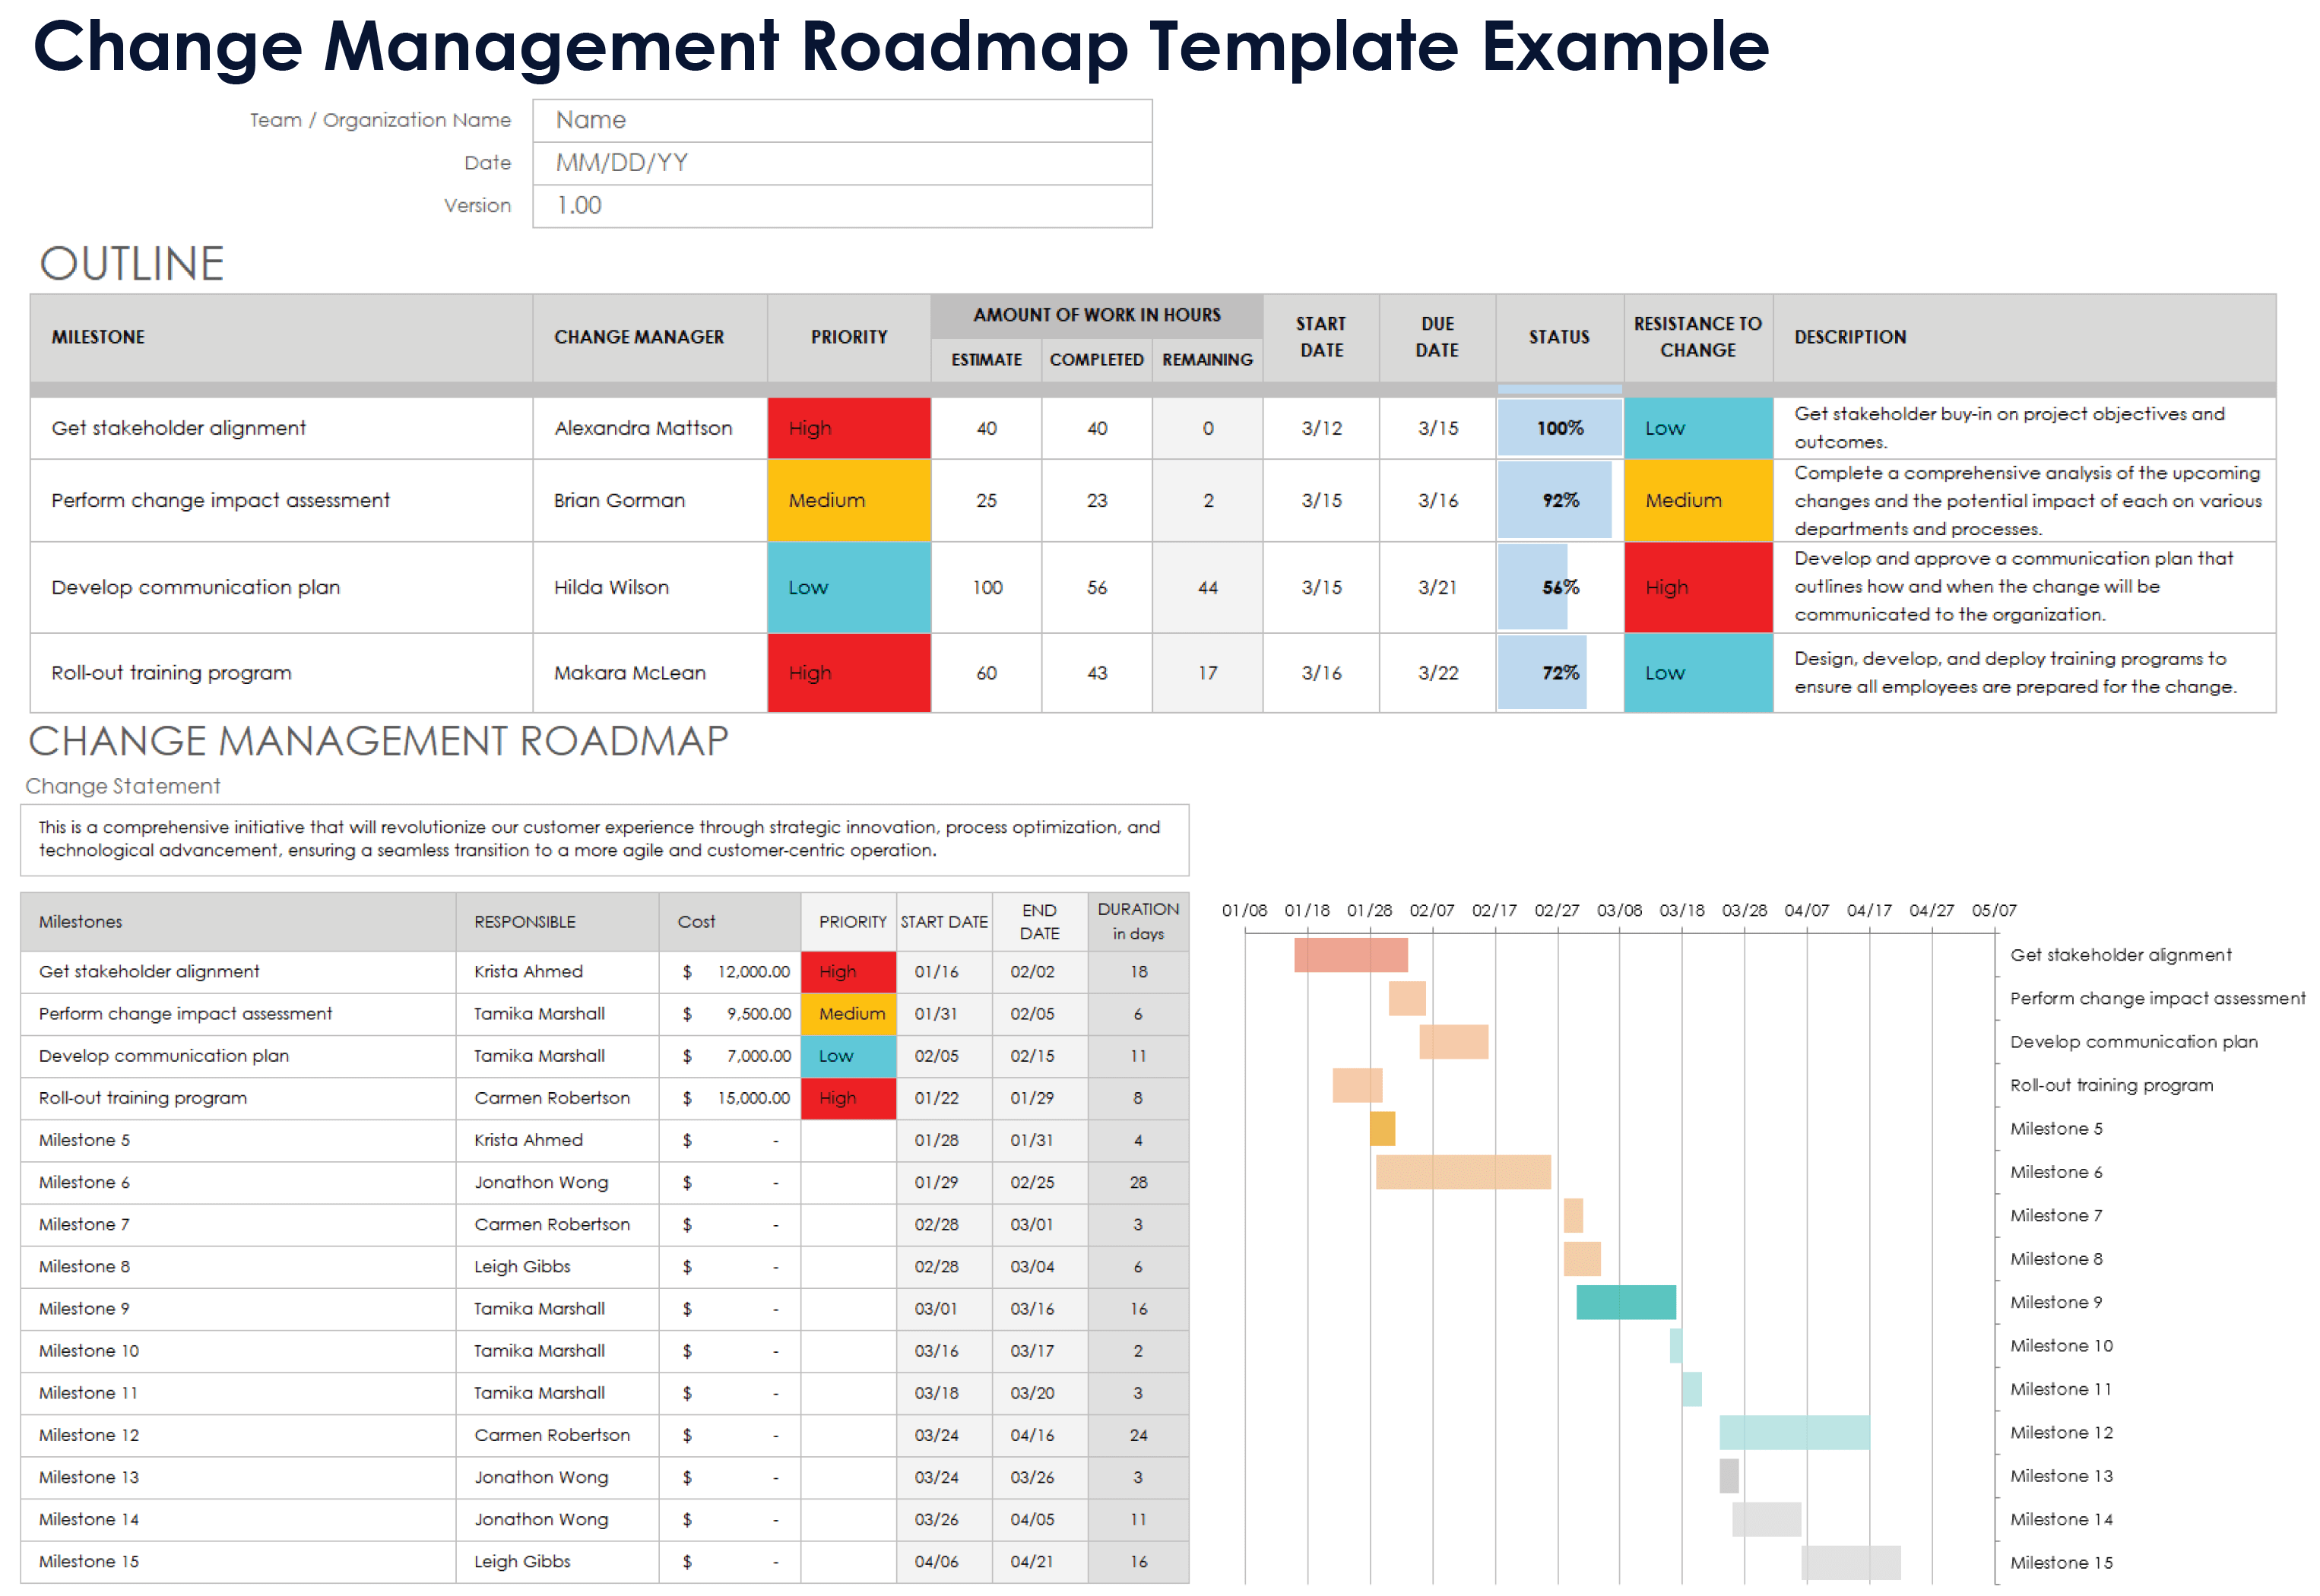 Change Management Roadmap Template Example